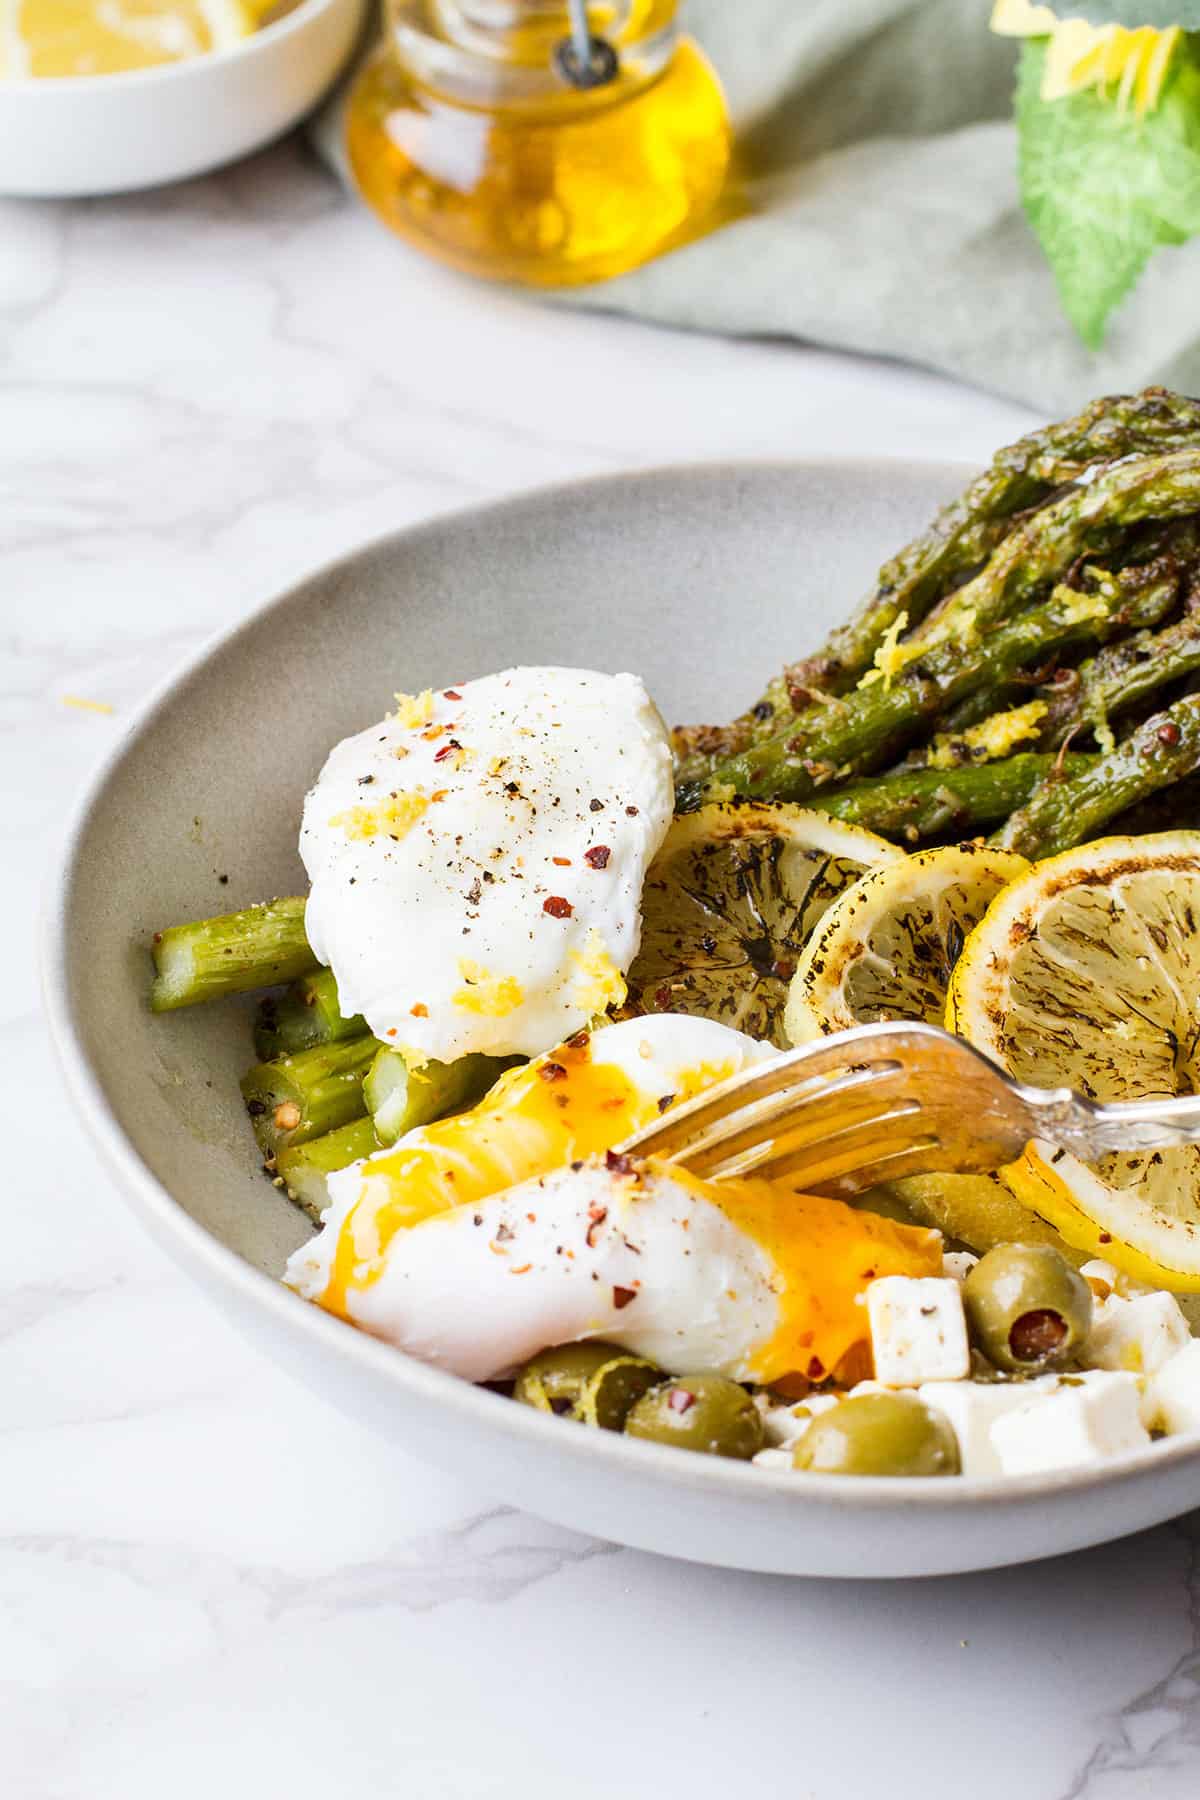 Cut open the poached egg with asparagus.